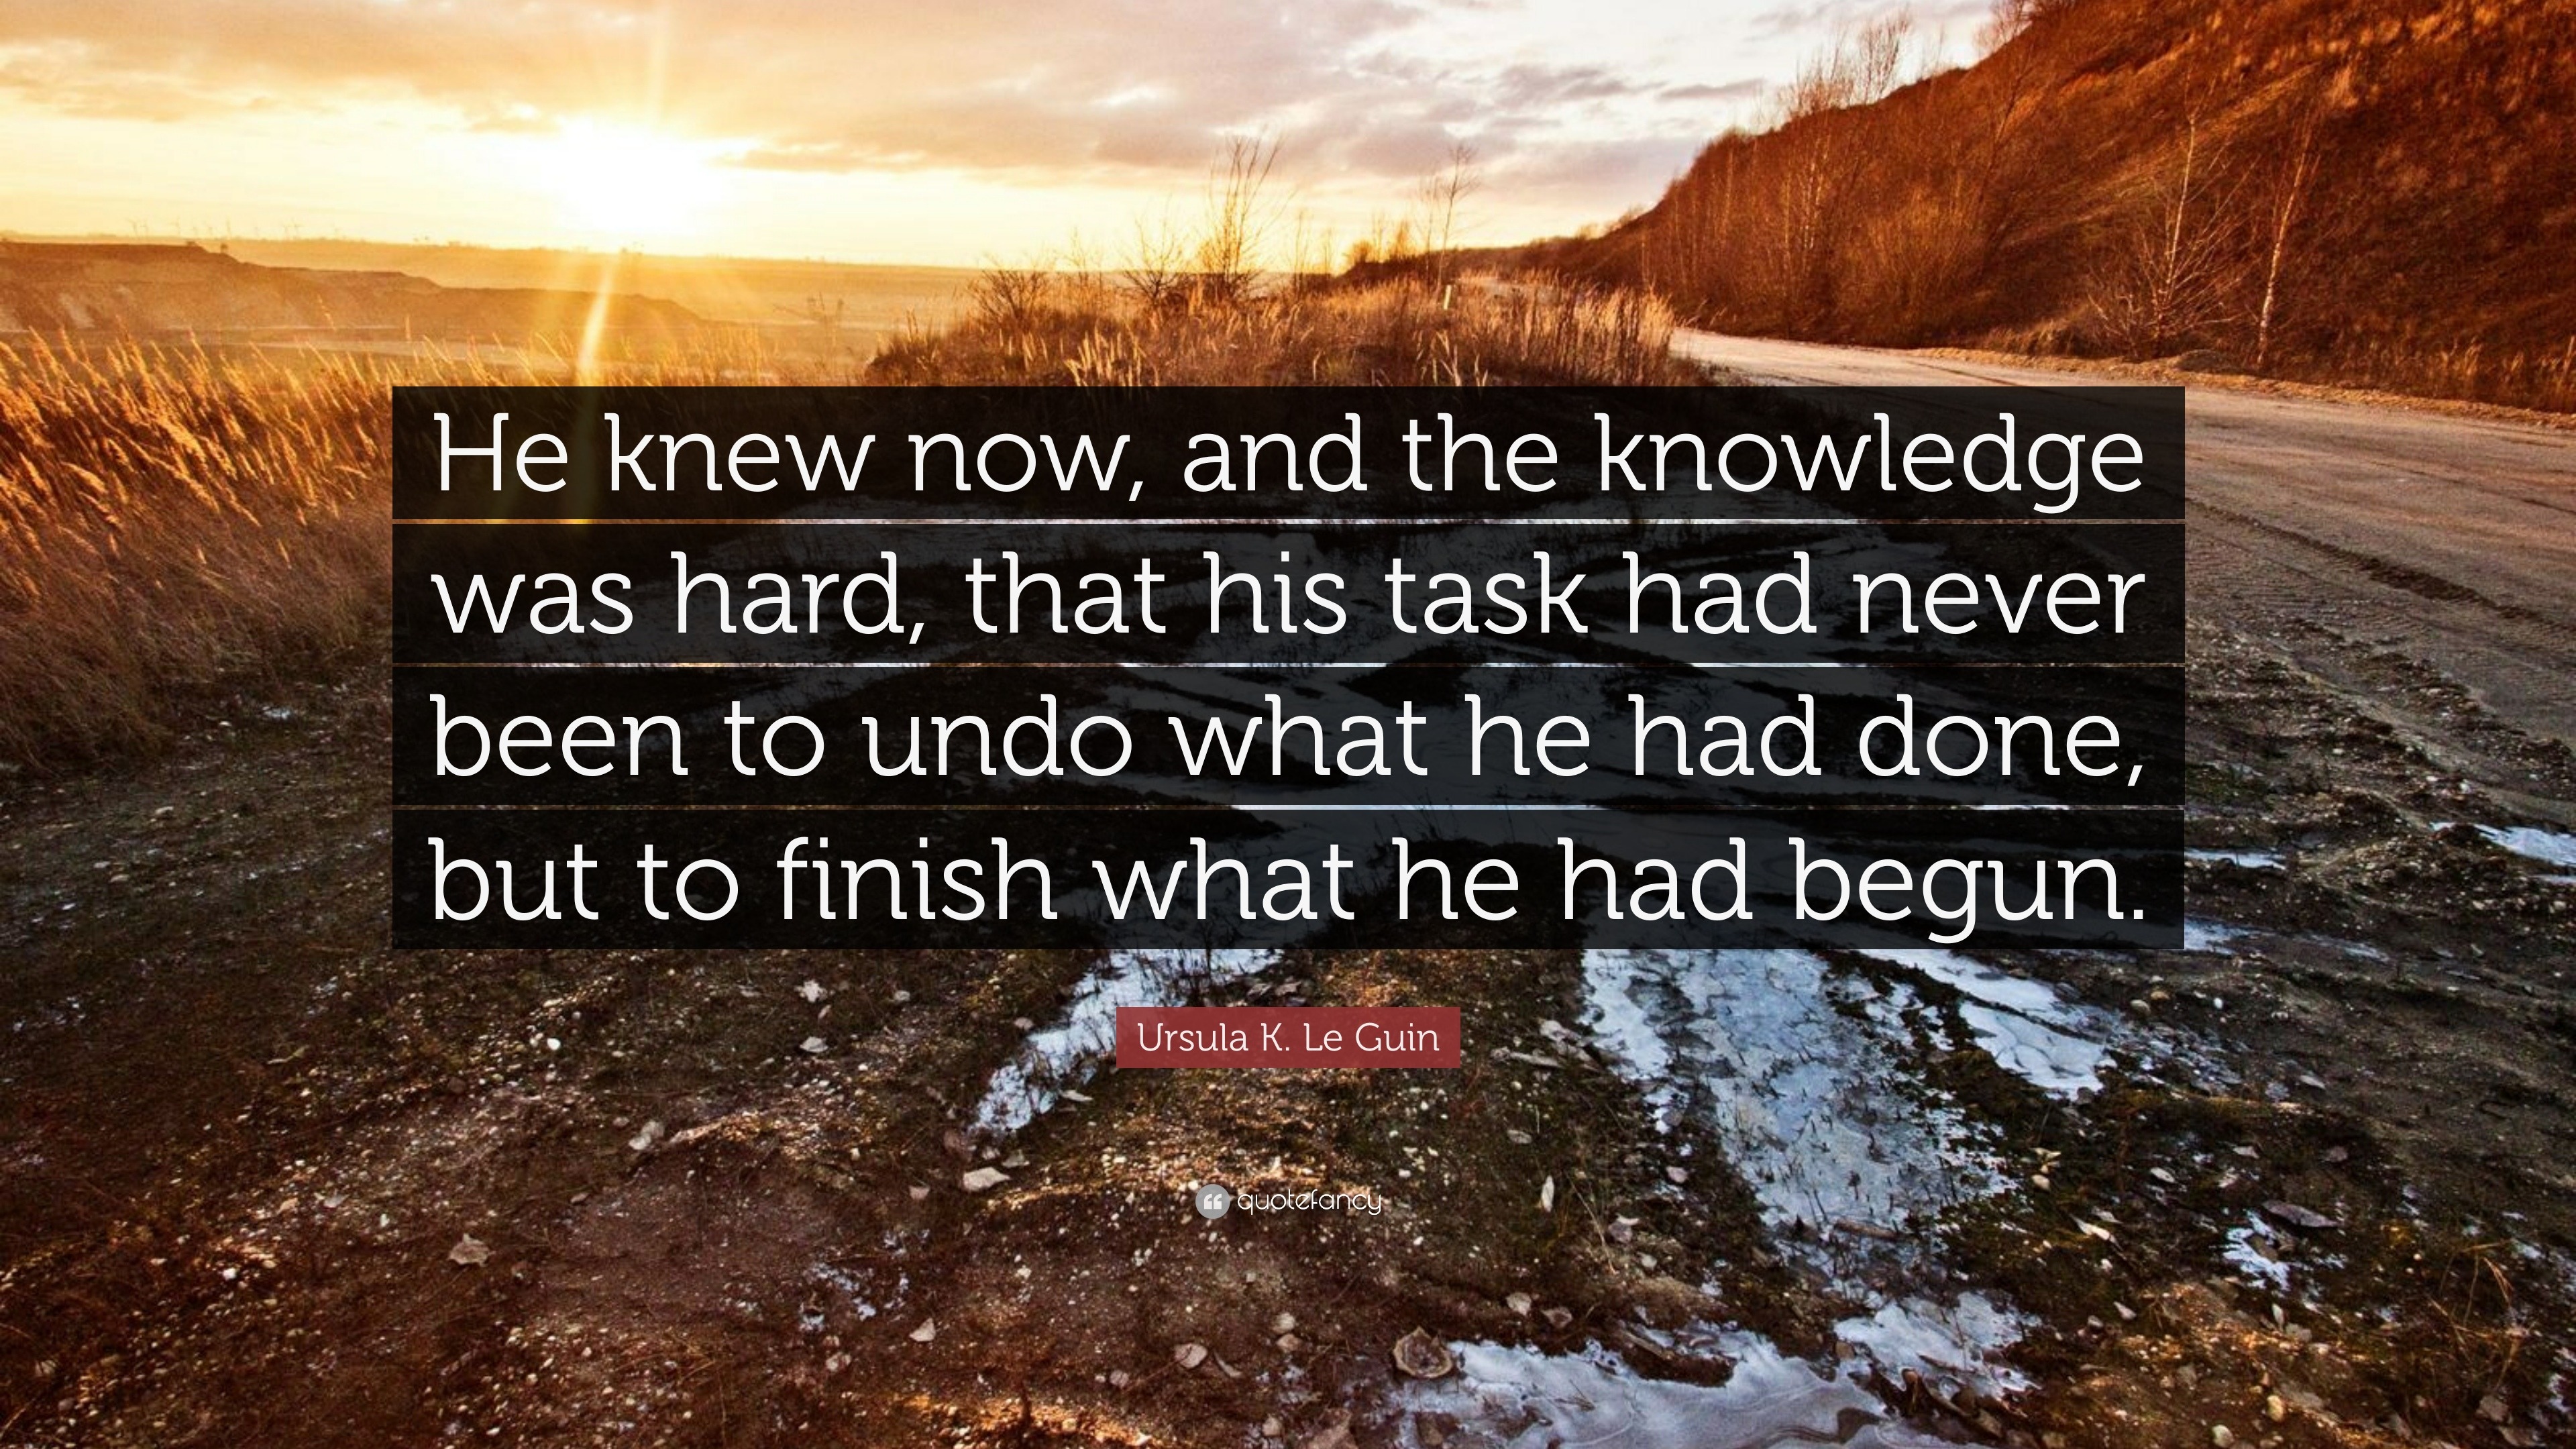 Ursula K Le Guin Quote “he Knew Now And The Knowledge Was Hard That His Task Had Never Been